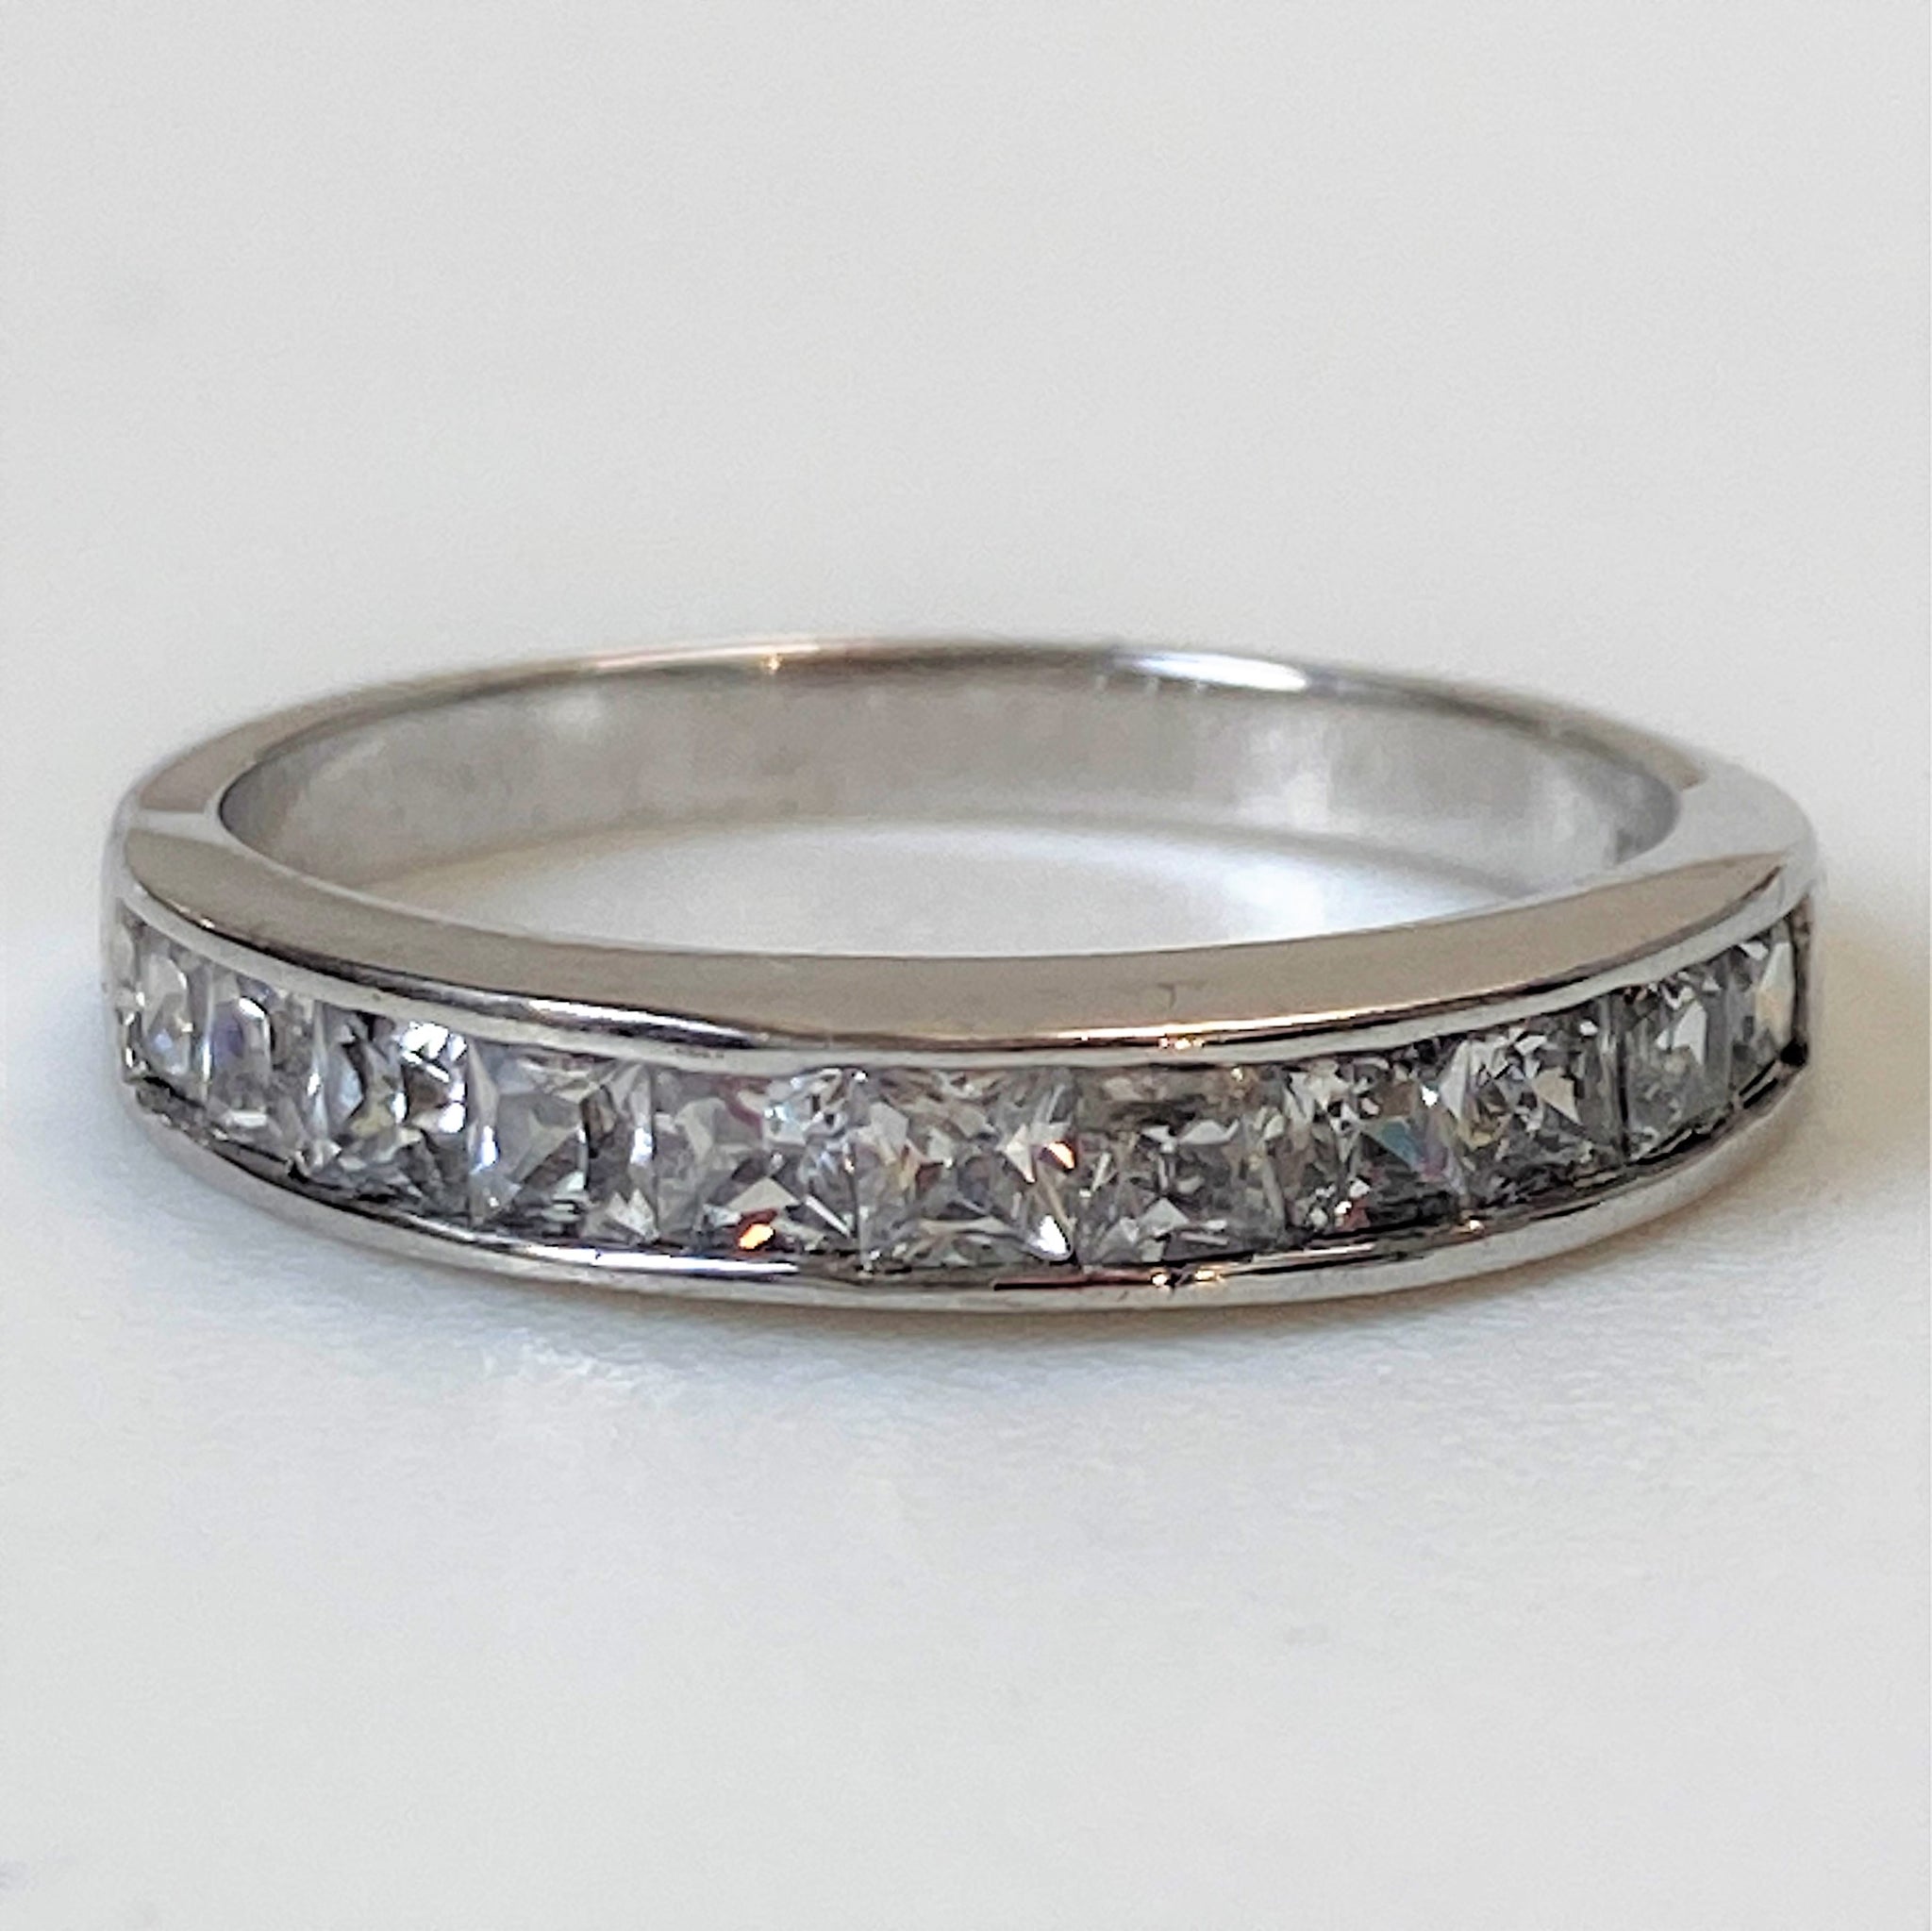 Sterling Silver and Crystal Semi-Eternity Ring